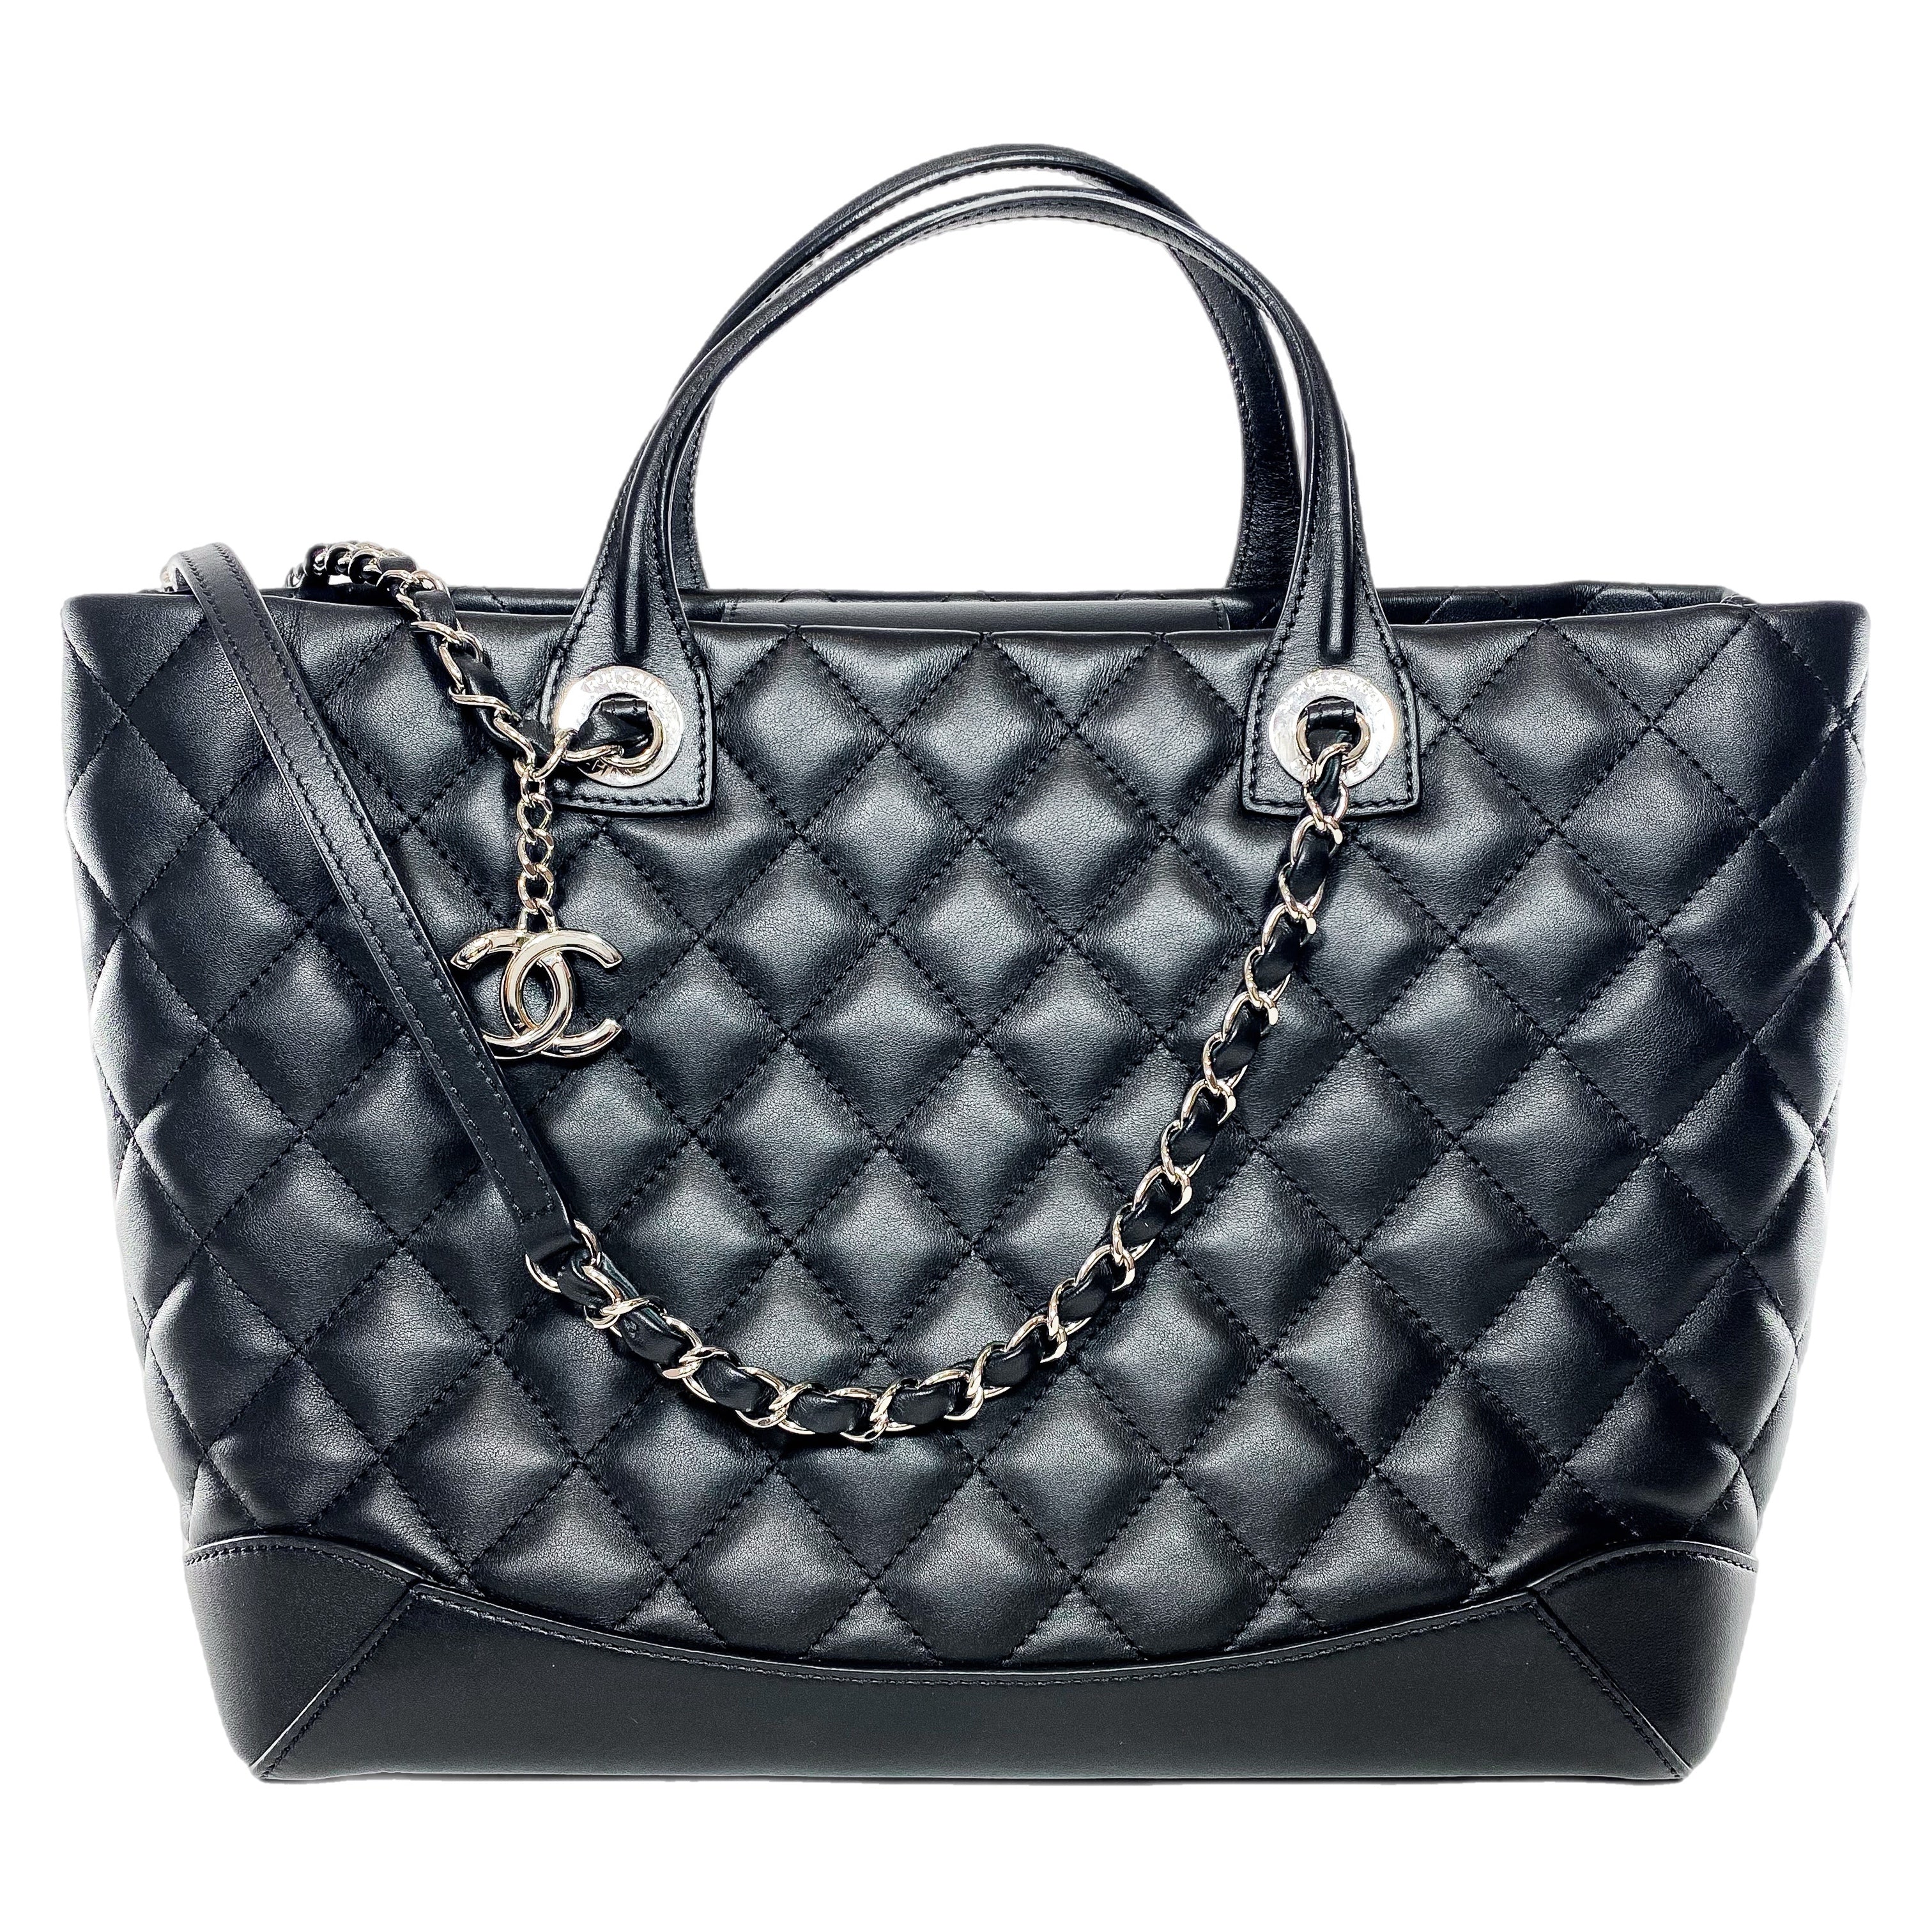 Chanel Black Small Easy Shopping Tote